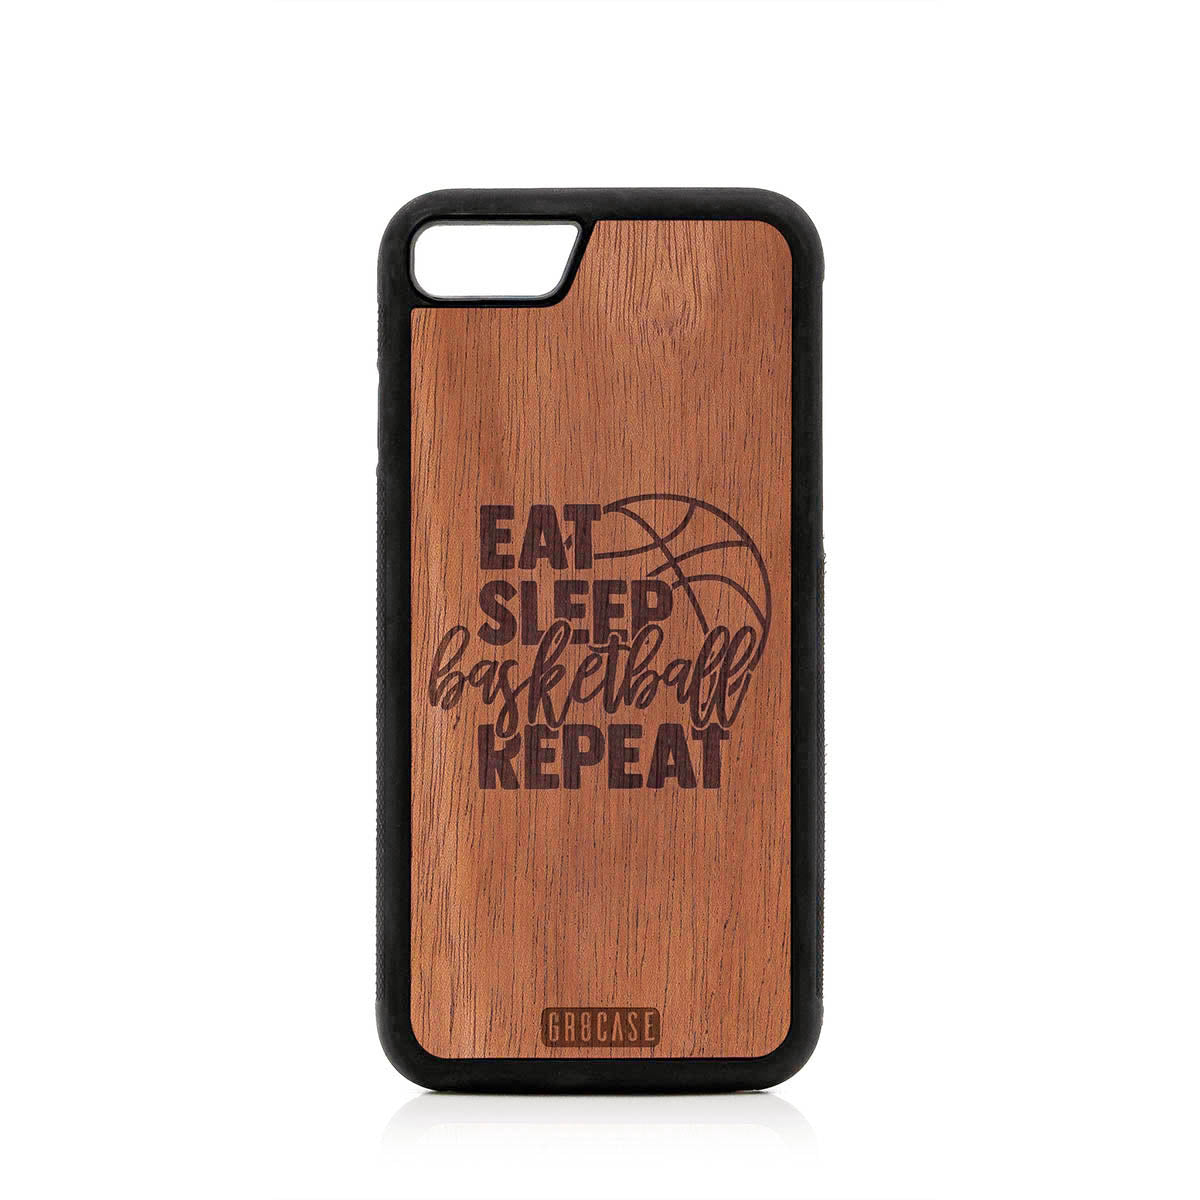 Eat Sleep Basketball Repeat Design Wood Case For iPhone 7/8